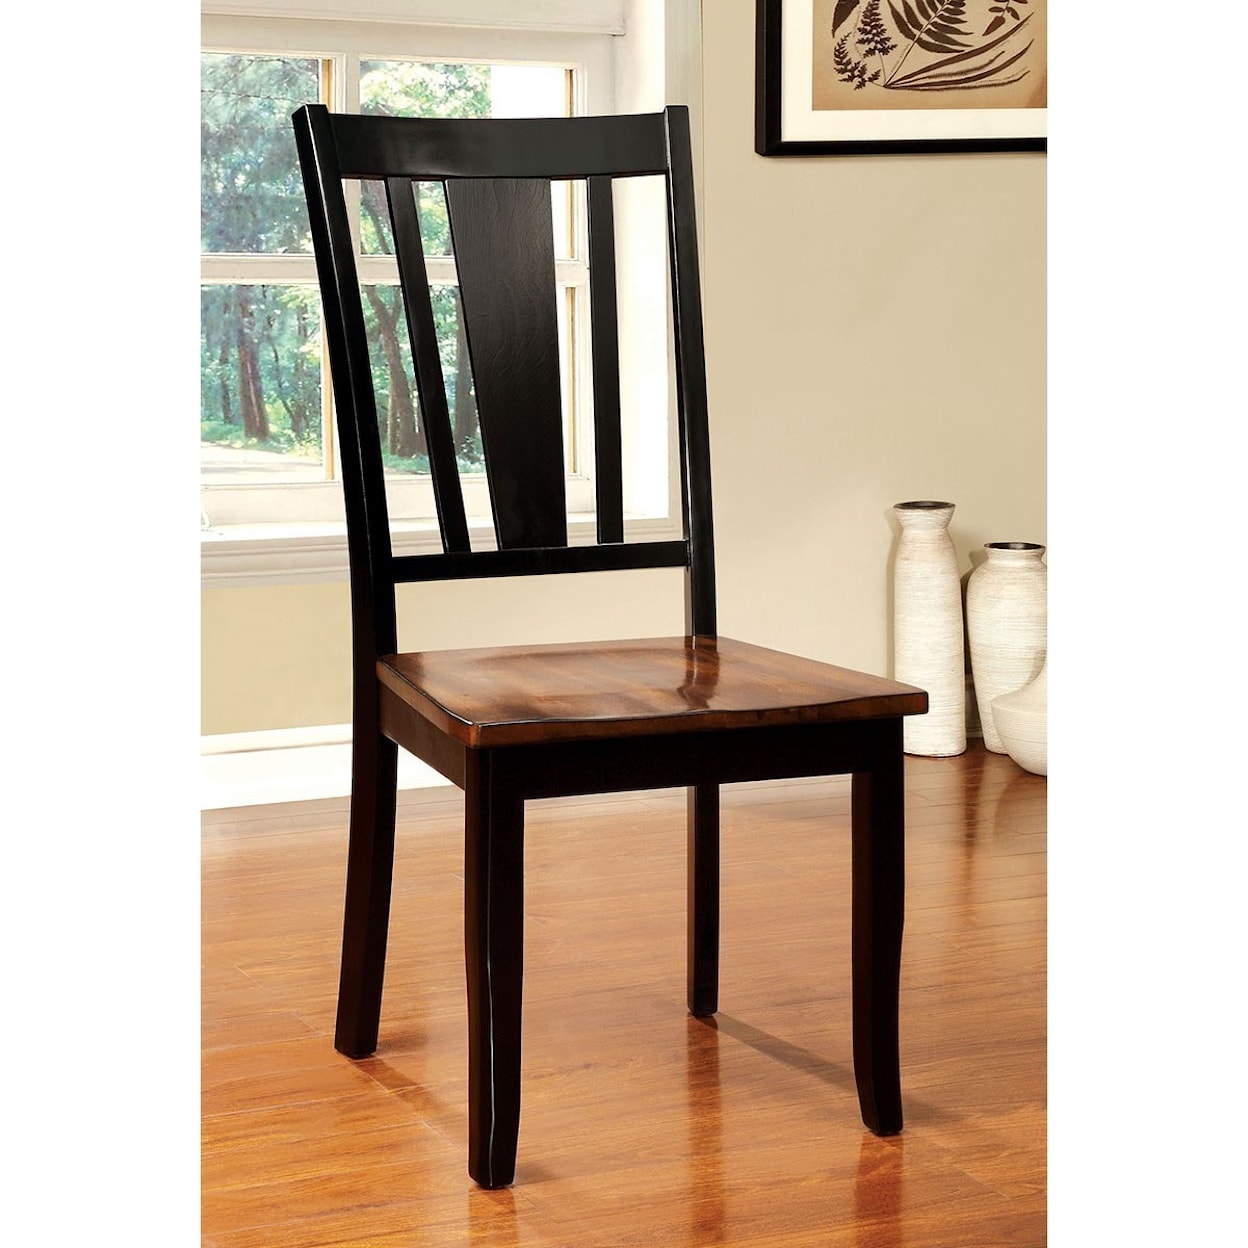 Furniture of America Dover II Side Chair